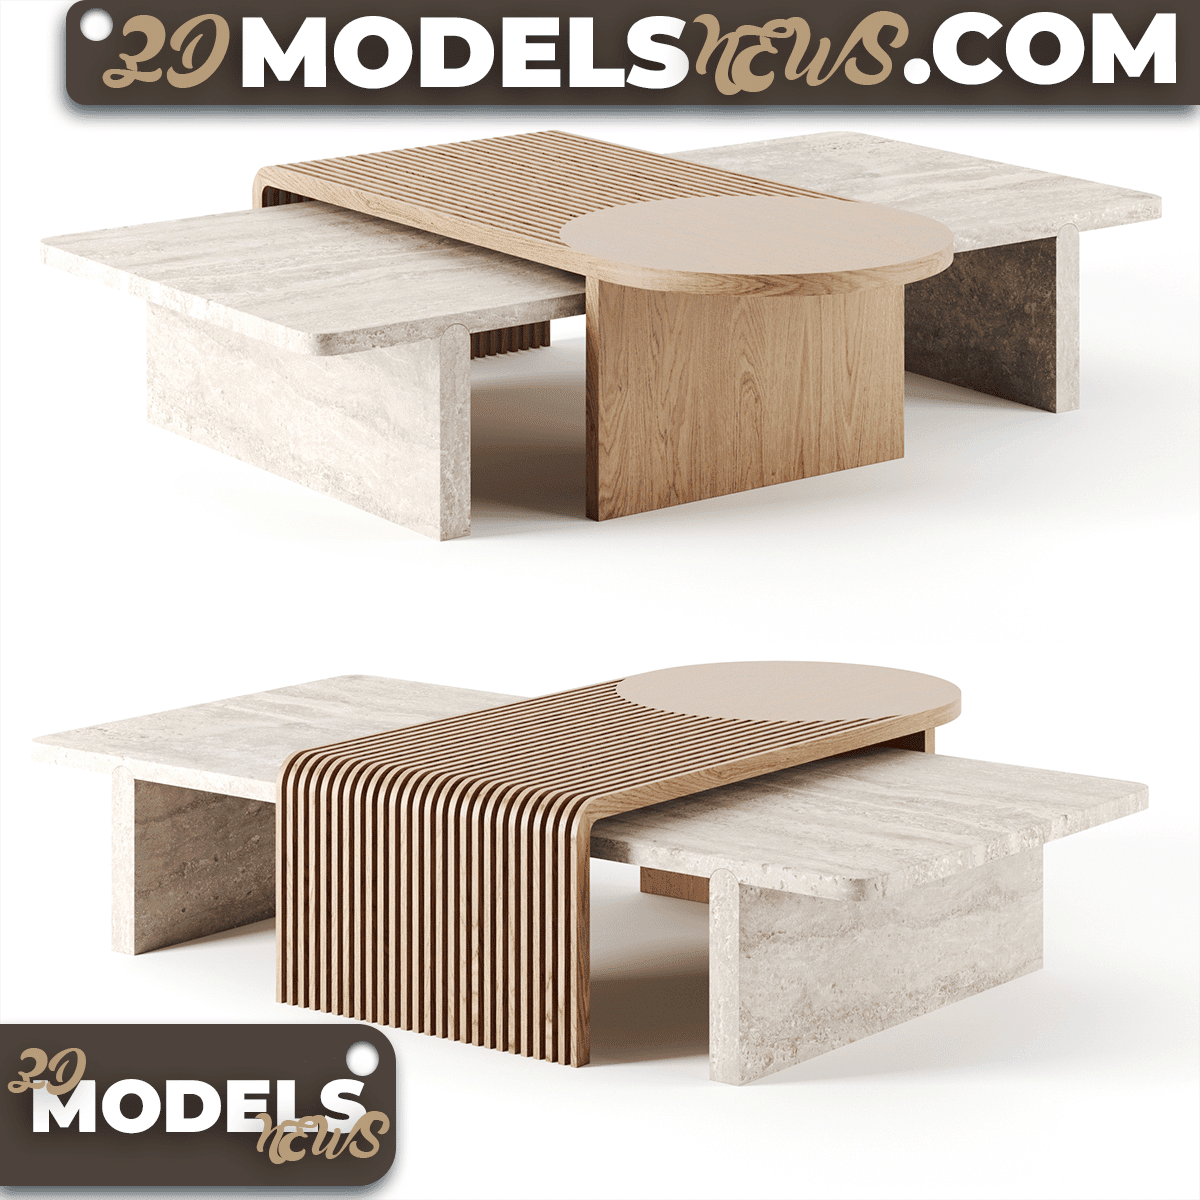 Stick and Stone Table Model by Dooq 1